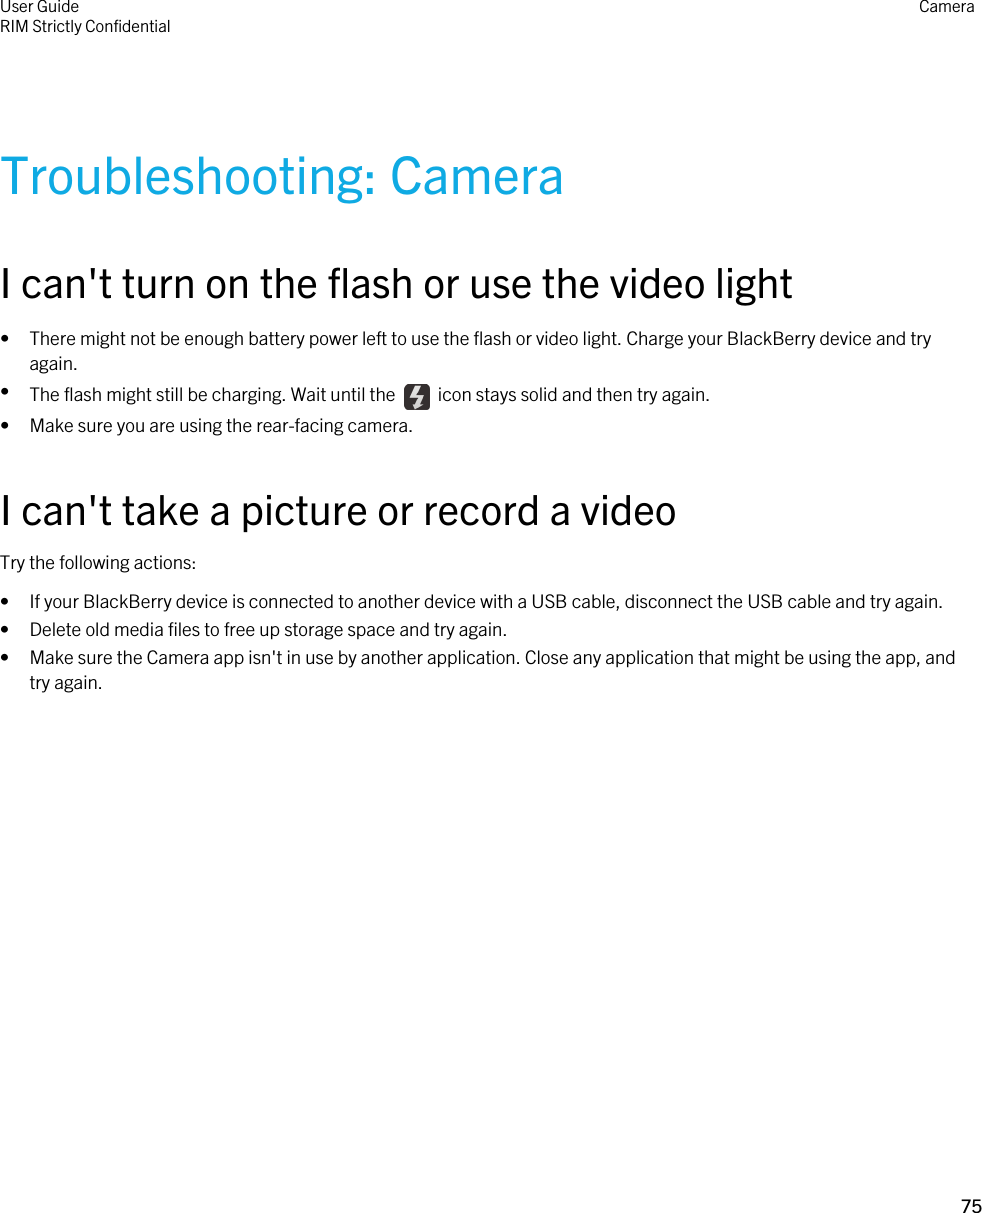 Troubleshooting: CameraI can&apos;t turn on the flash or use the video light• There might not be enough battery power left to use the flash or video light. Charge your BlackBerry device and try again.•The flash might still be charging. Wait until the    icon stays solid and then try again.• Make sure you are using the rear-facing camera.I can&apos;t take a picture or record a videoTry the following actions:• If your BlackBerry device is connected to another device with a USB cable, disconnect the USB cable and try again.• Delete old media files to free up storage space and try again.• Make sure the Camera app isn&apos;t in use by another application. Close any application that might be using the app, and try again.User GuideRIM Strictly Confidential Camera75 